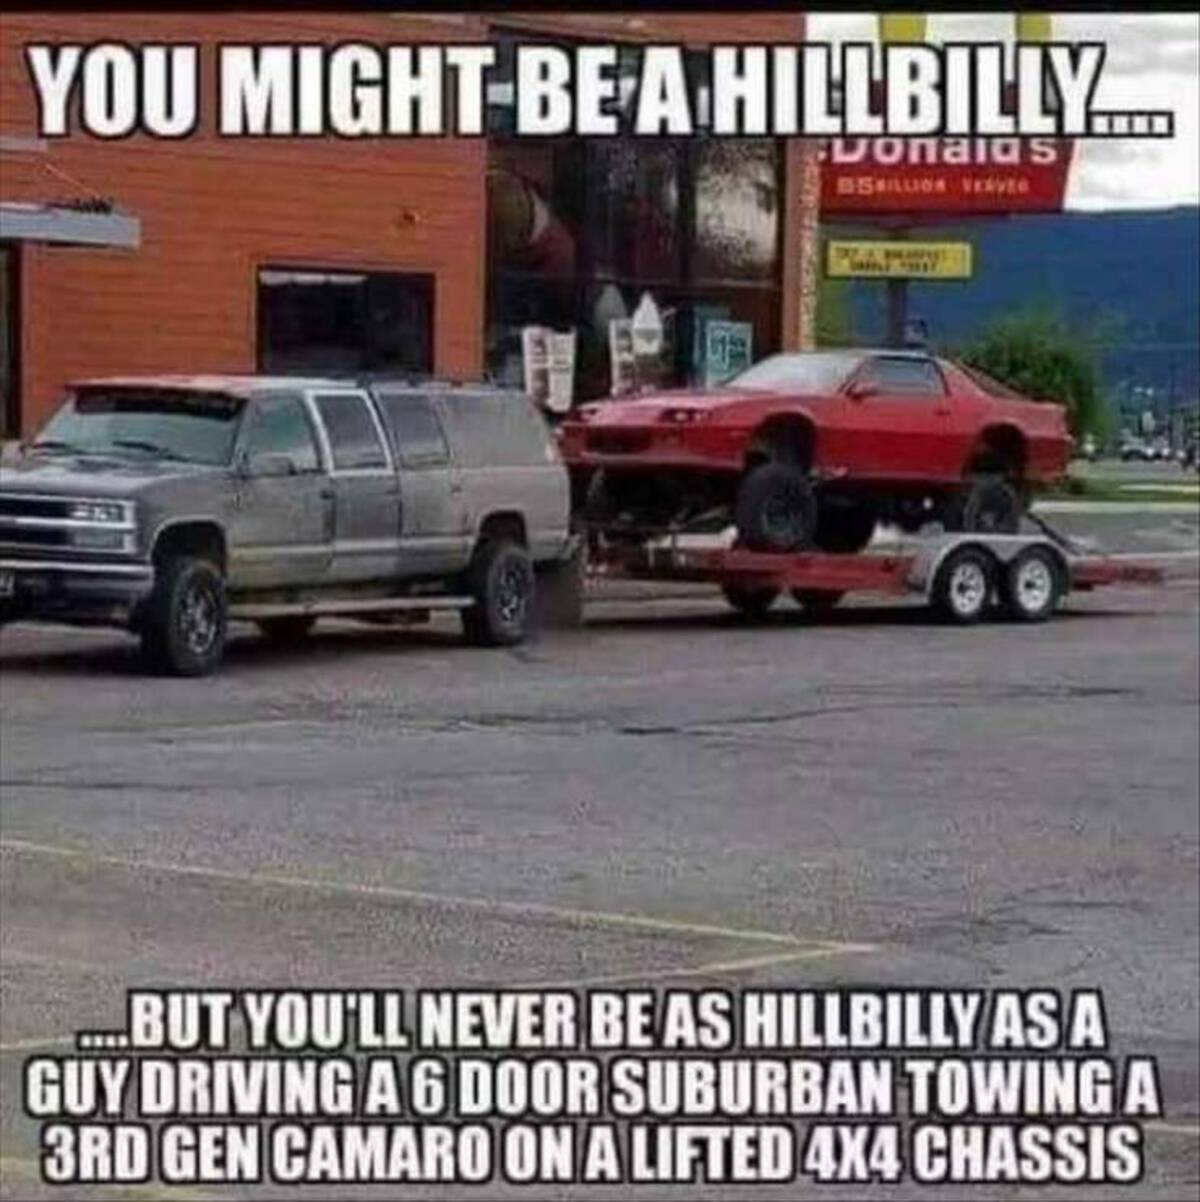 chevy suburban meme - You Might Be A Hillbilly..... Donalds Bskillige Verve But You'Ll Never Be As Hillbilly As A Guy Driving A 6 Door Suburban Towing A 3RD Gen Camaro On A Lifted 4X4 Chassis